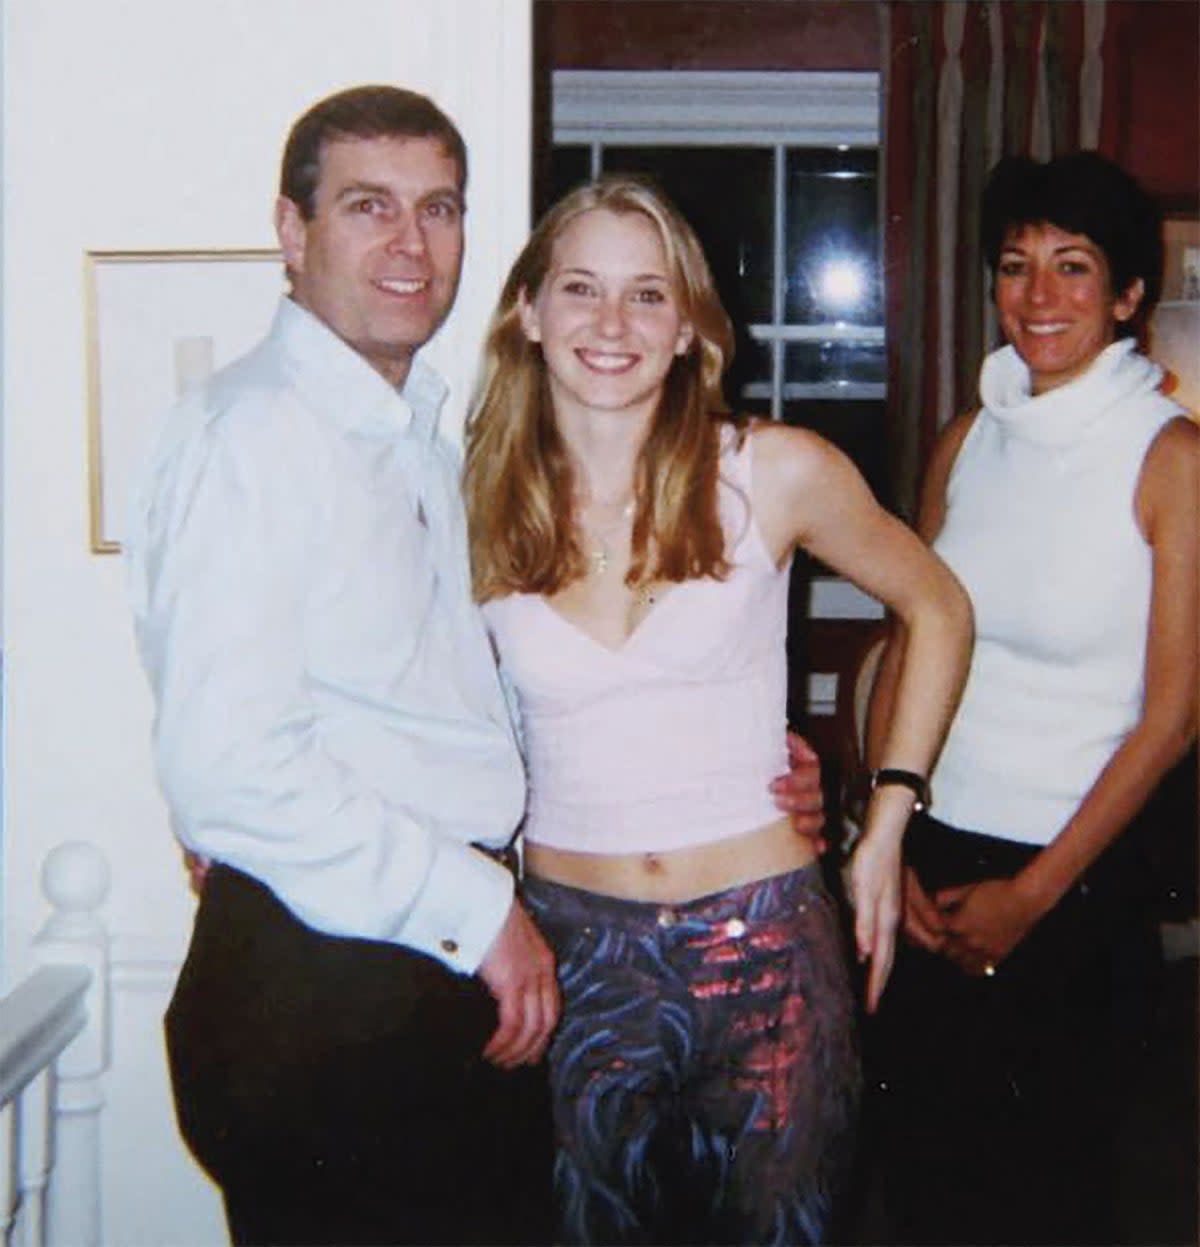 The Duke  pictured with his accuser Virginia Giuffre and Ghislaine Maxwell (US District Court - Southern Dis)